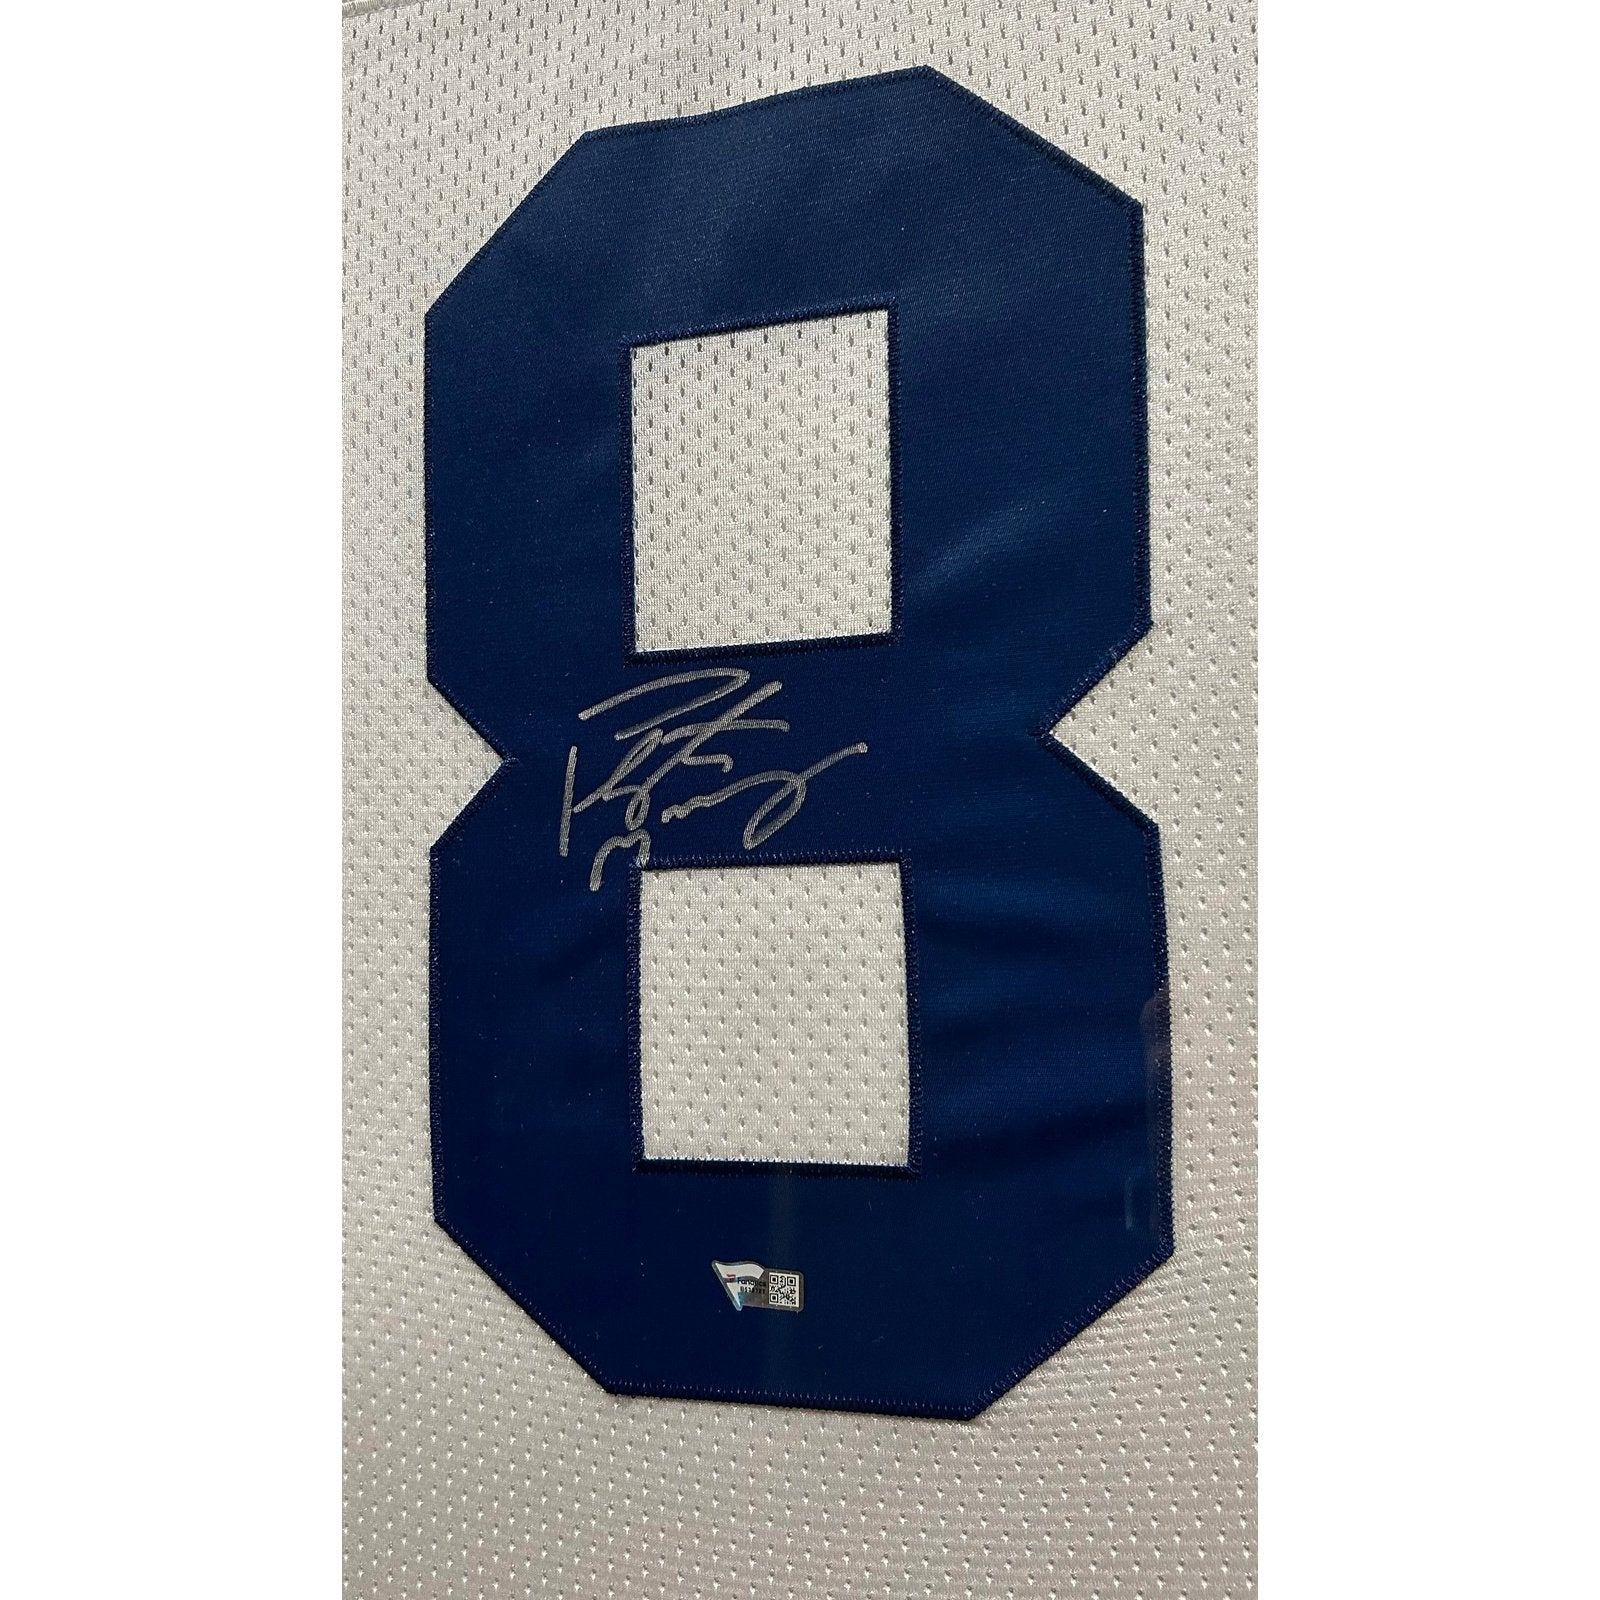 Peyton Manning Framed Signed Jersey Fanatics Indianapolis Colts Autographed